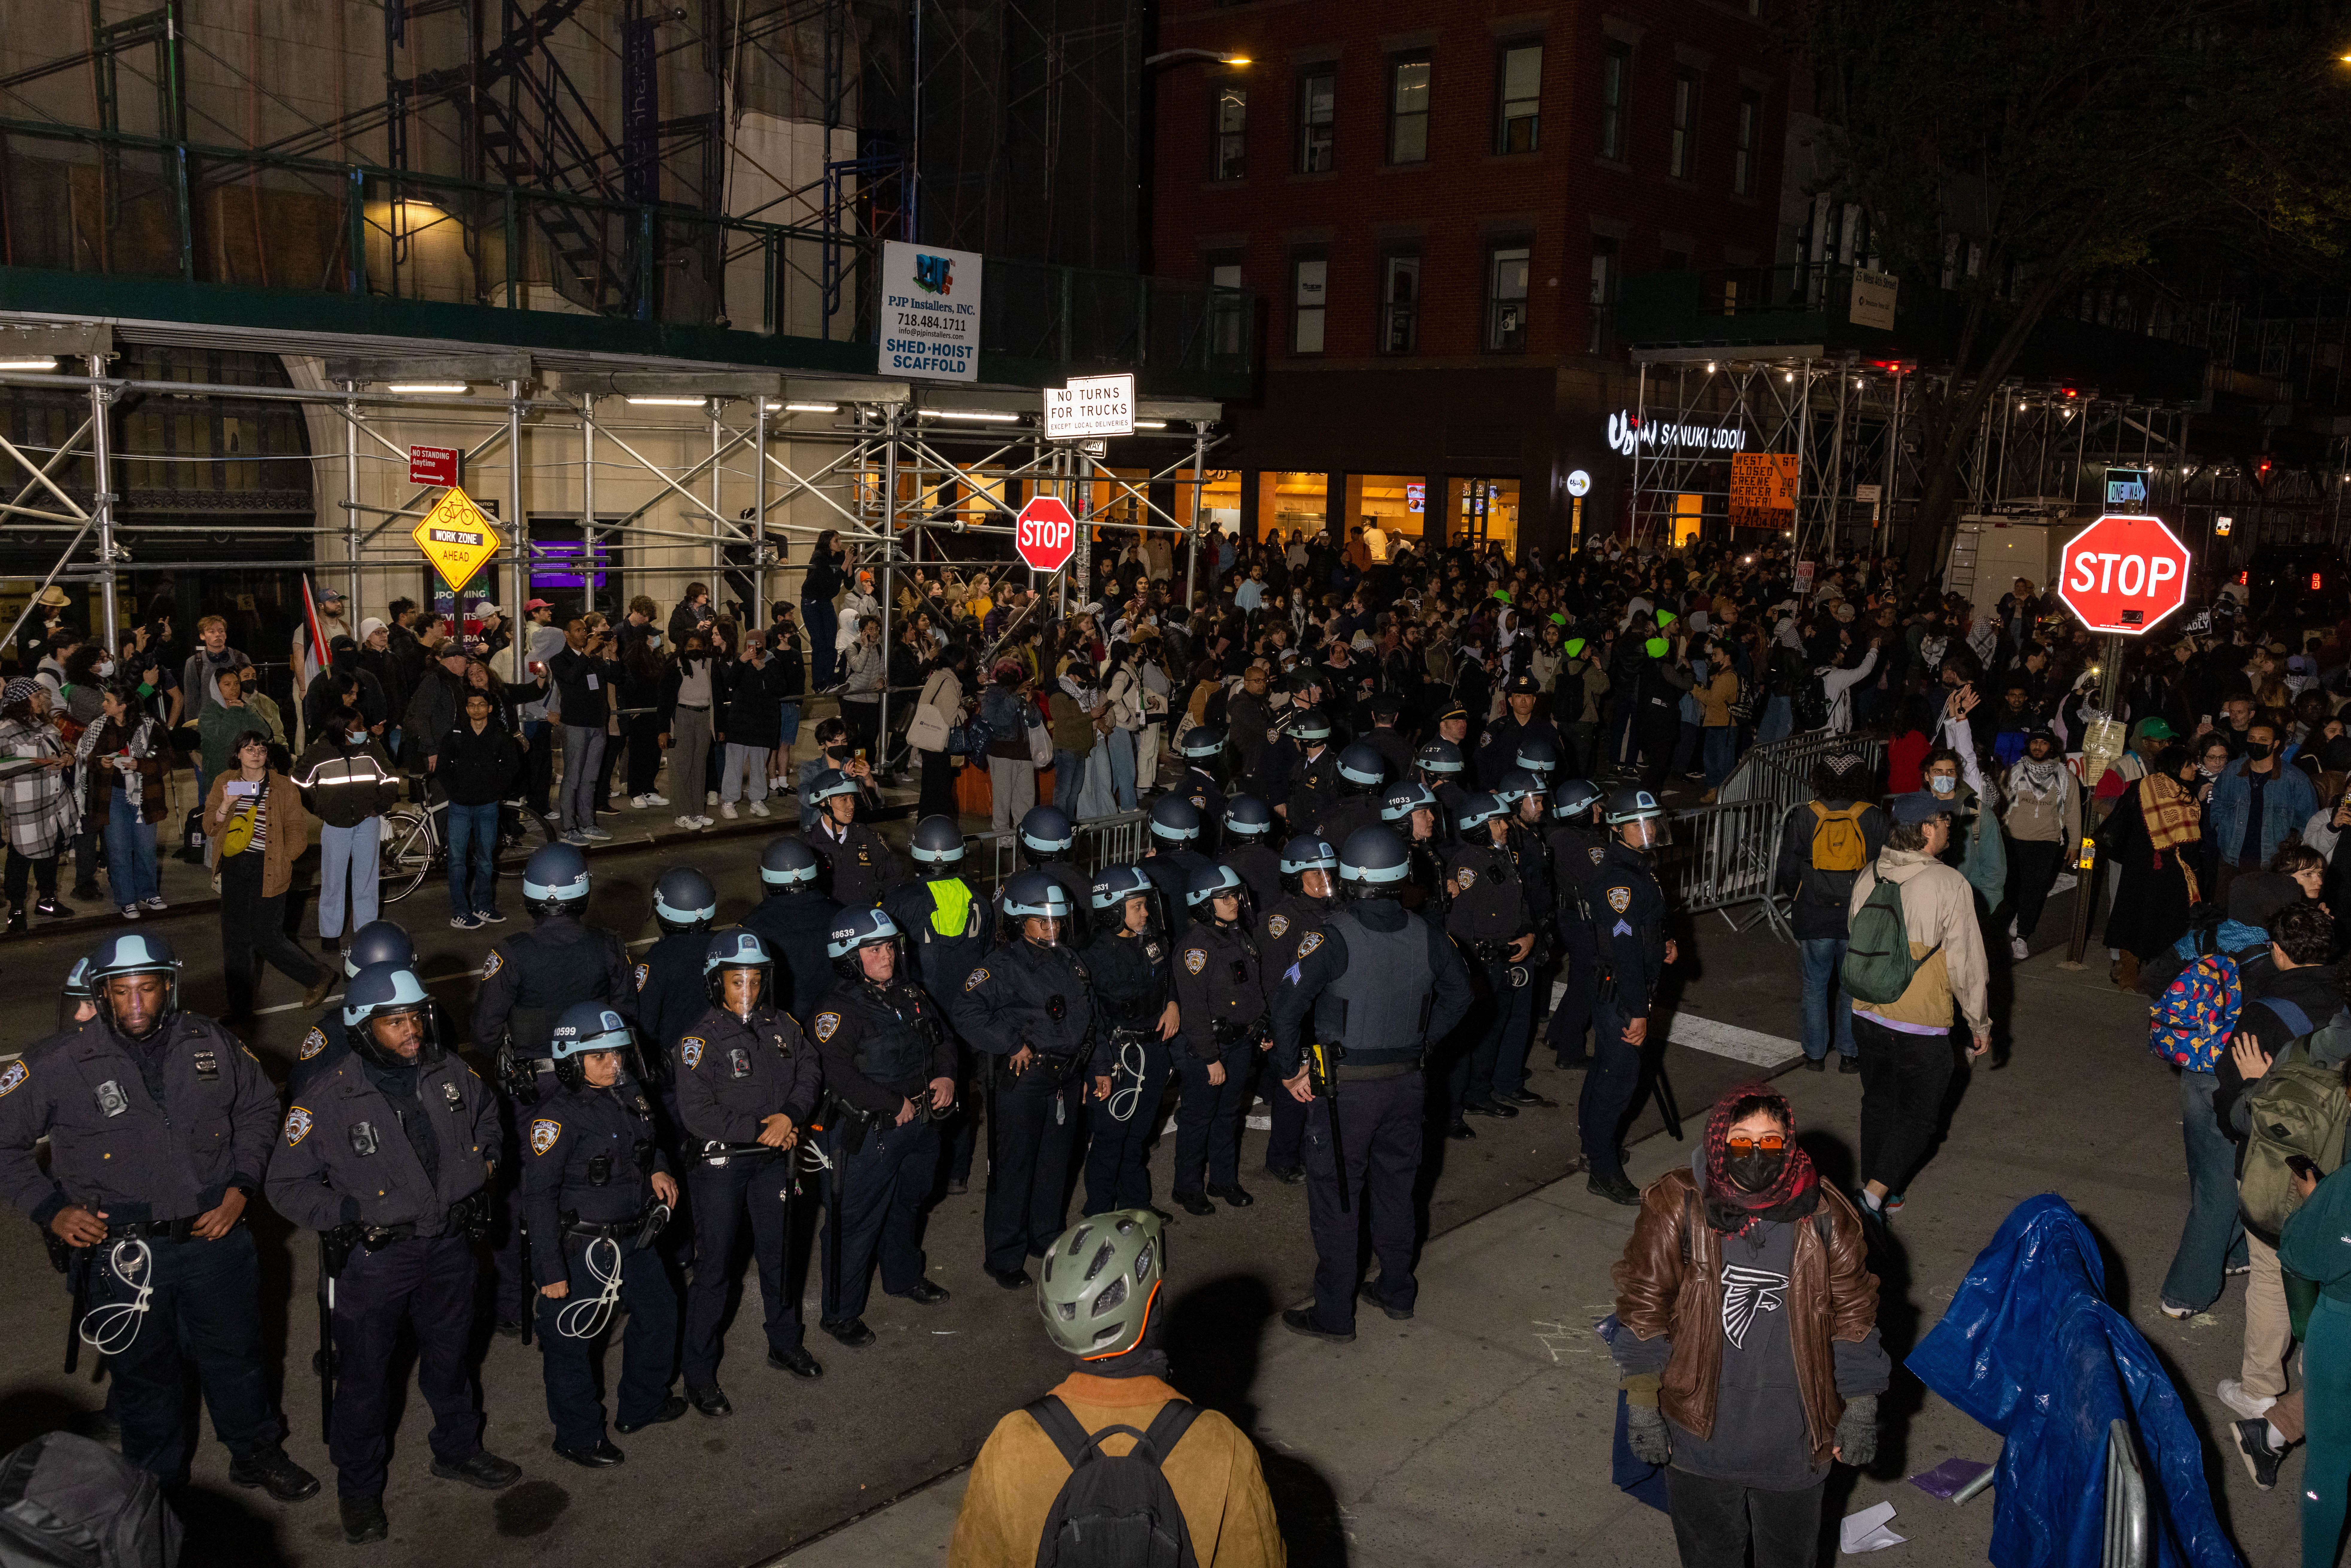 NYPD officers stand by after detaining demonstrators and clearing an encampment set up by pro-Palestine protesters on the campus of New York University